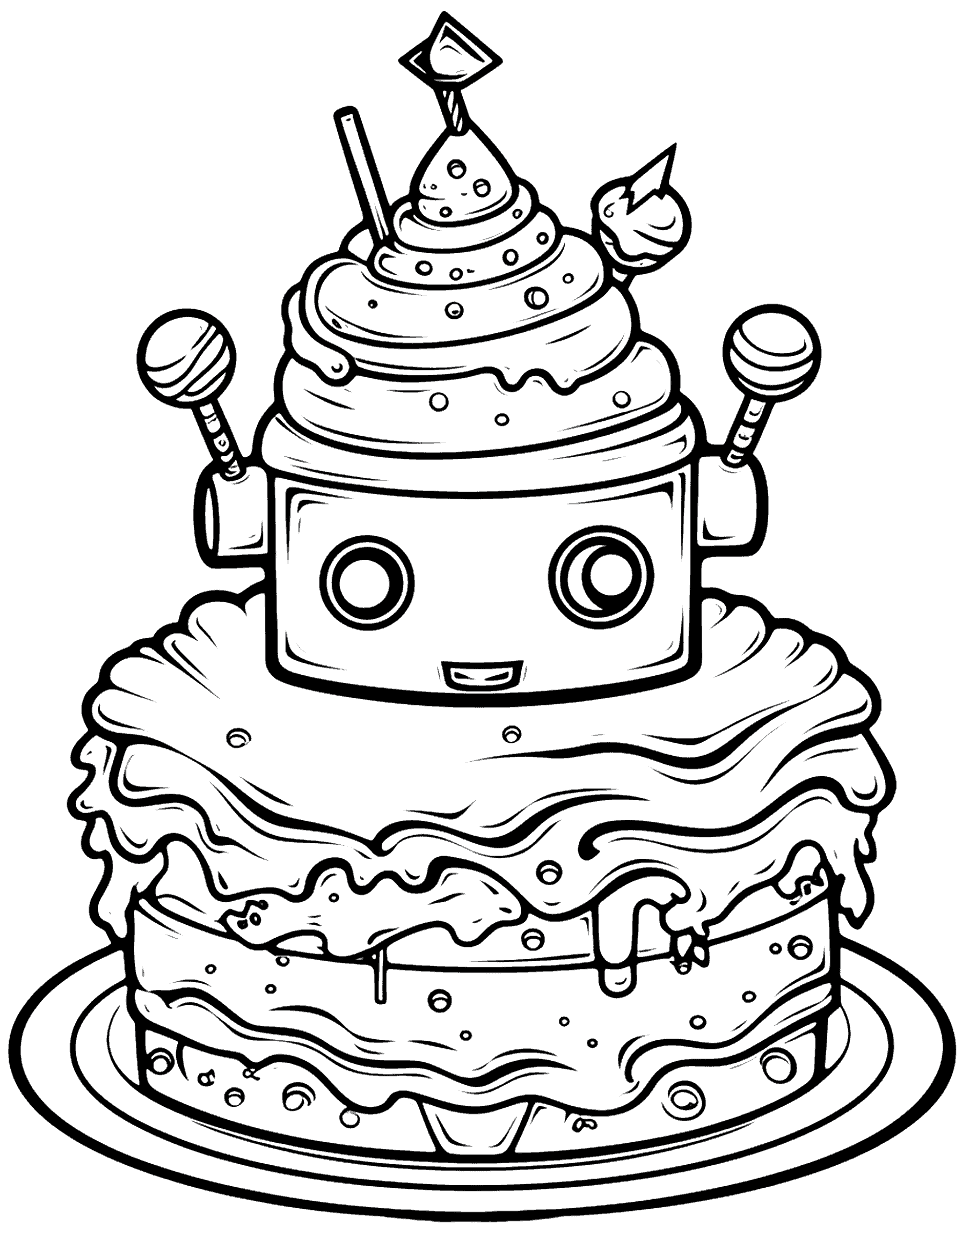 Robot Revolution Cake Coloring Page - A cake designed like a robot.